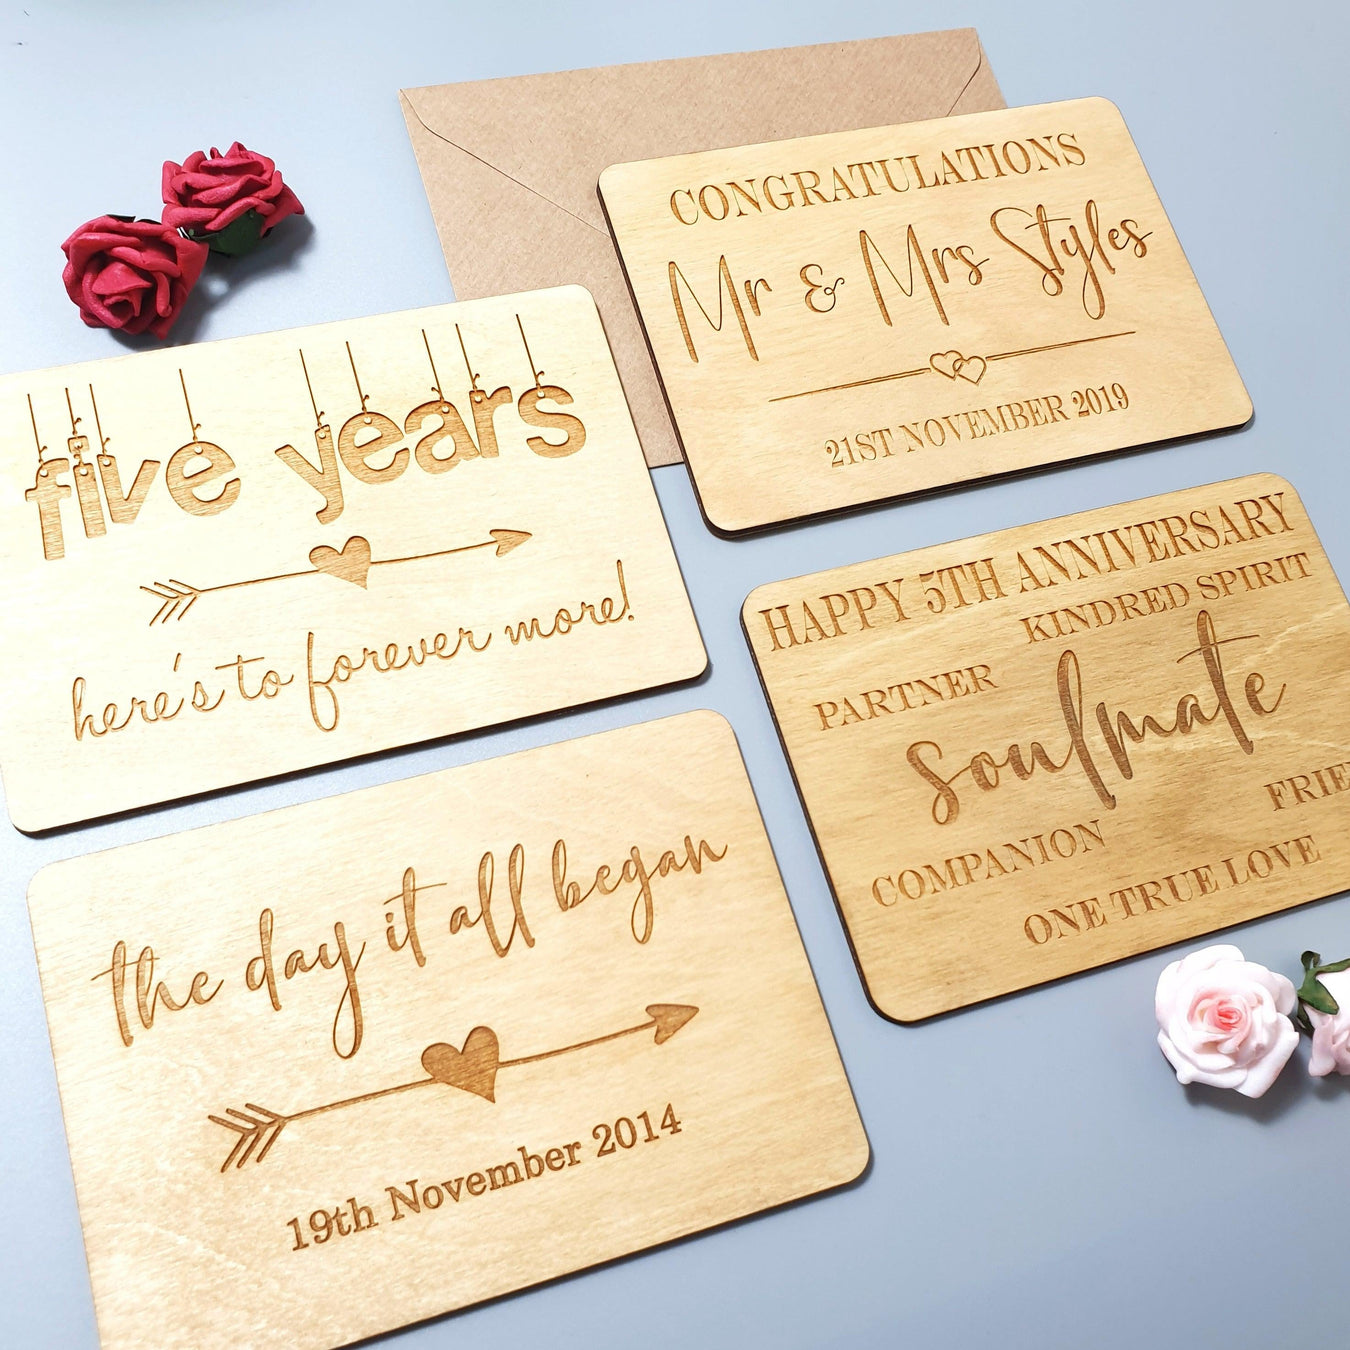 Wooden Celebrations Postcards I 5th Anniversary Cards I Wedding Cards